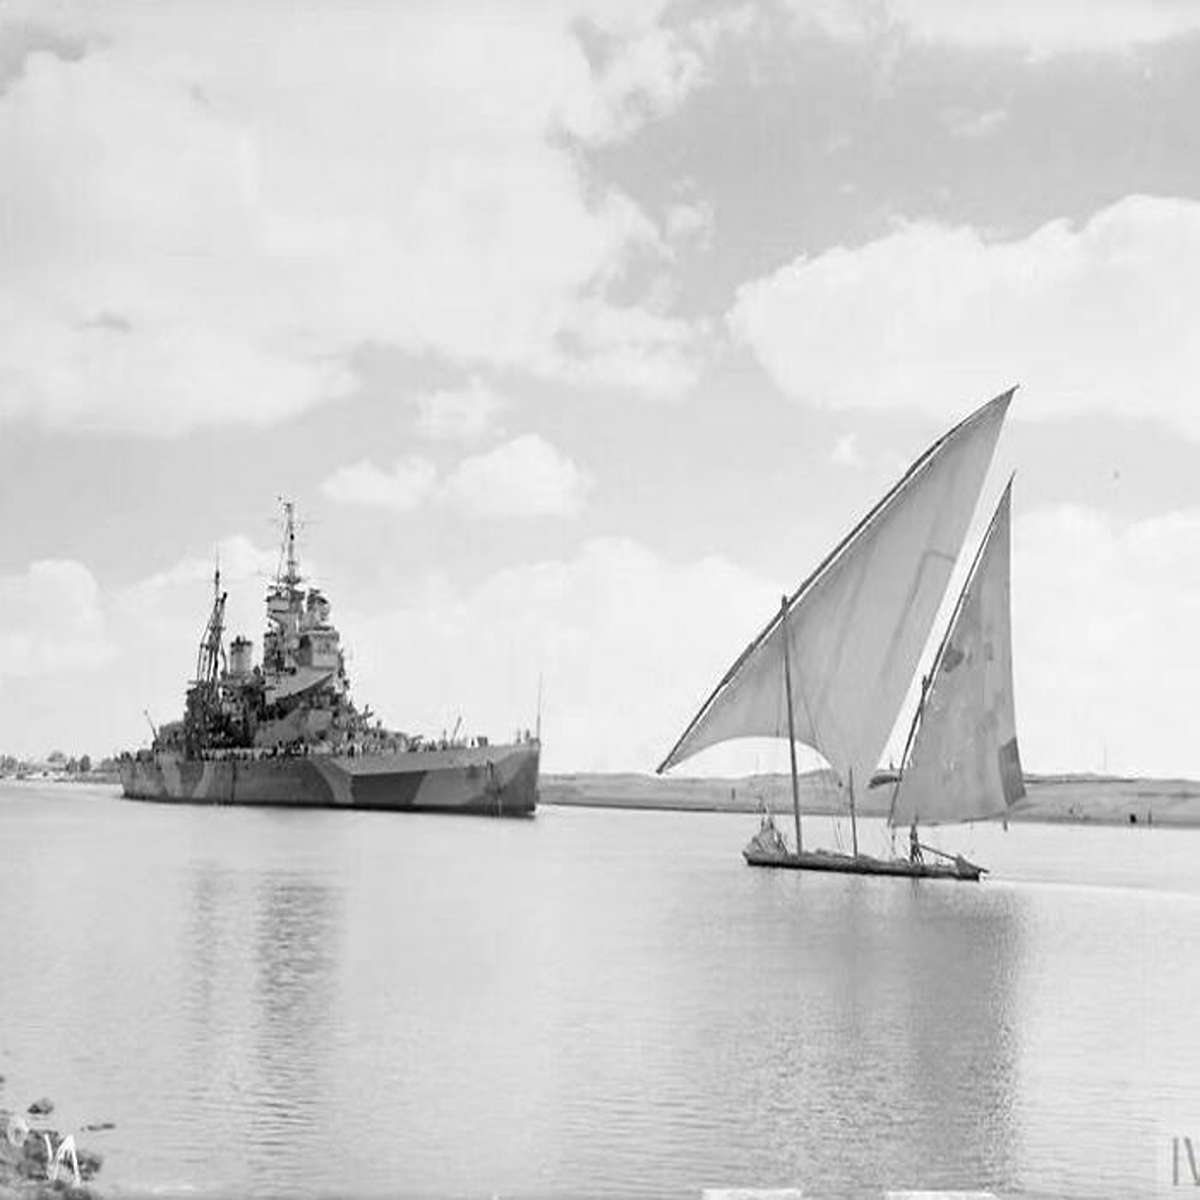 (1944) Hms Howe Steams Past A Dhow While Transiting Through The Suez Canal, Egypt